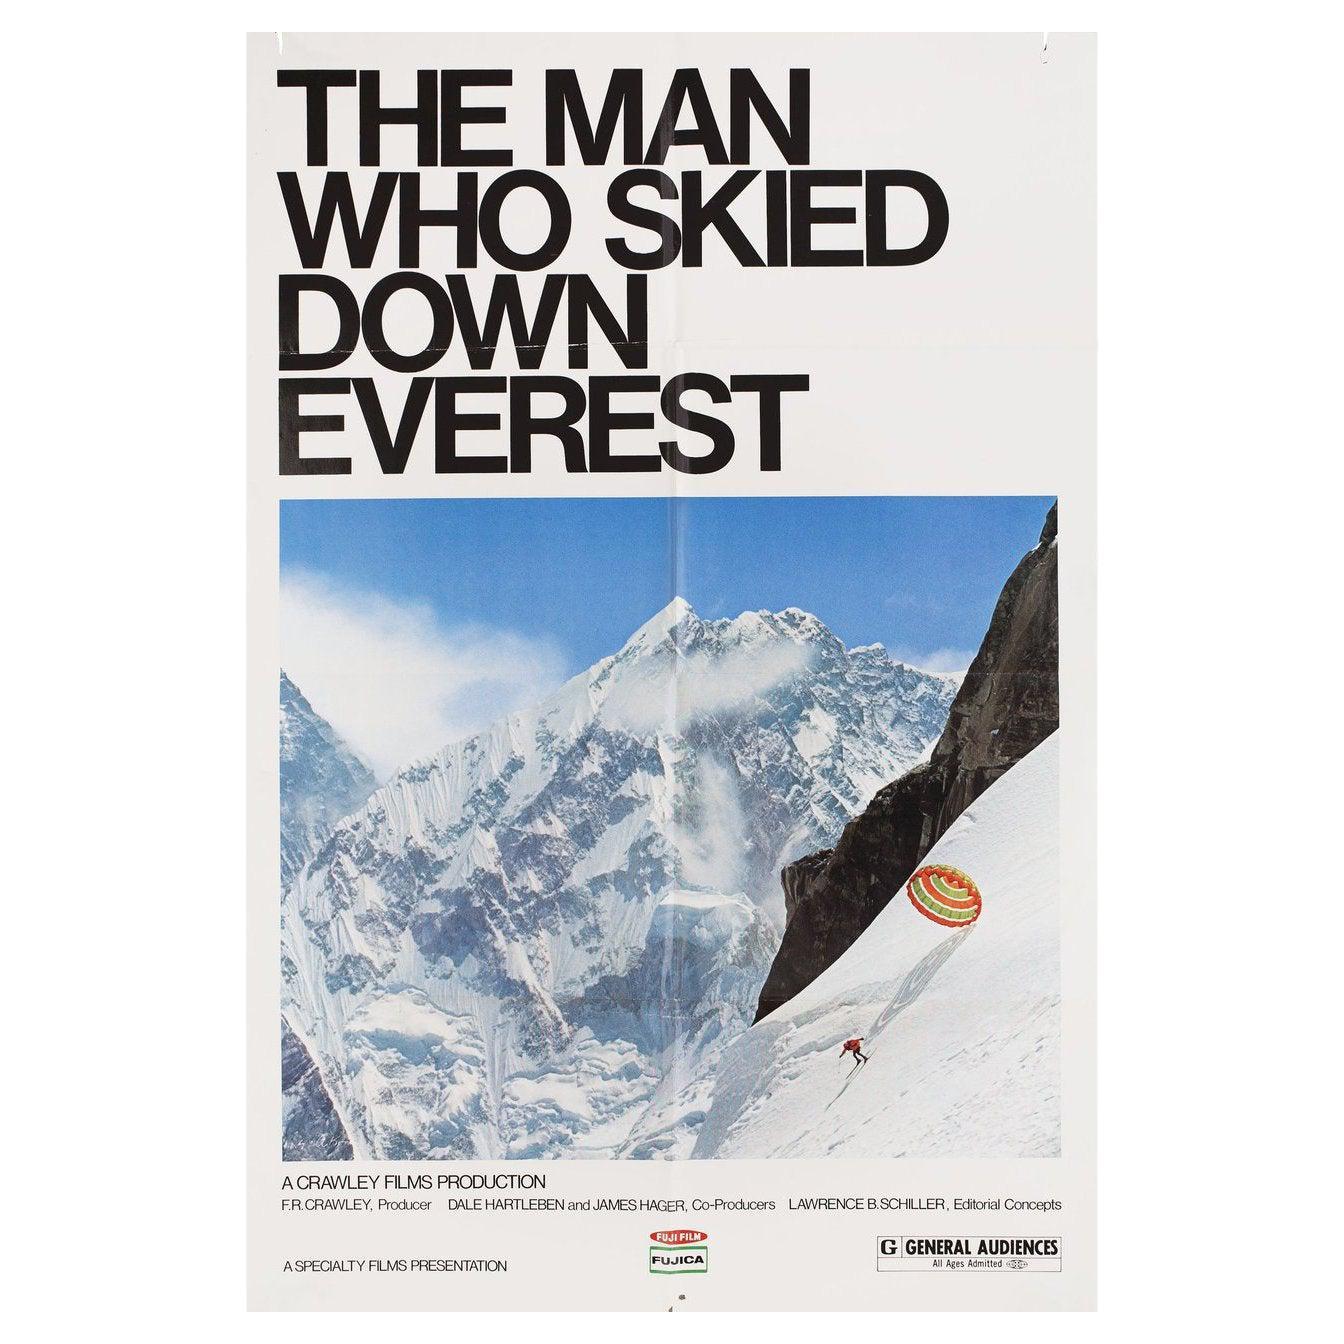 The Man Who Skied Down Everest 1975 U.S. Film Poster For Sale